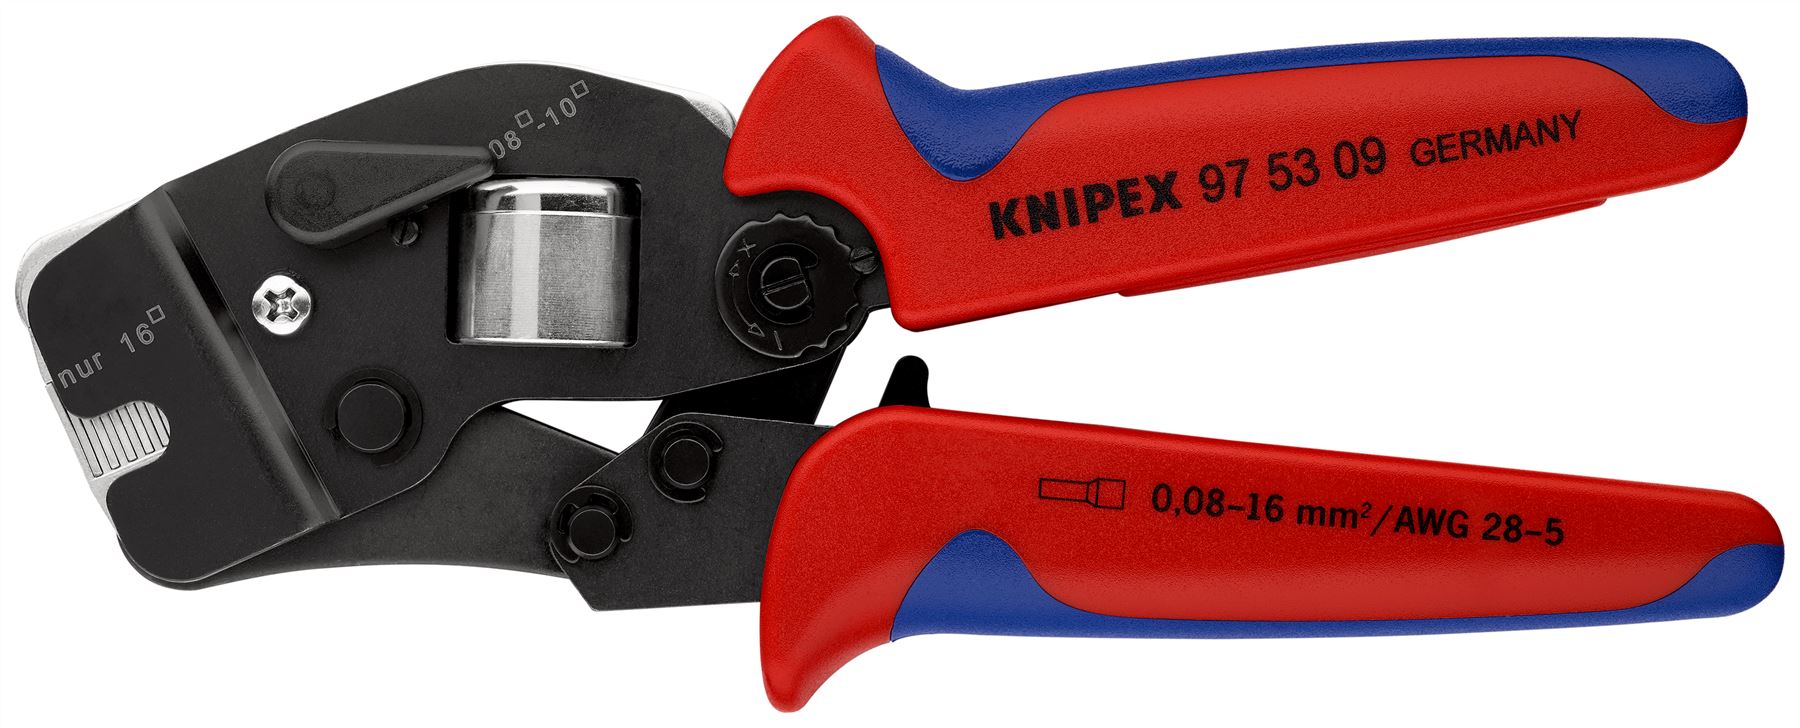 Knipex Crimping Pliers Self Adjusting for Wire Ferrules with Front Loading Multi Component Grips 97 53 09